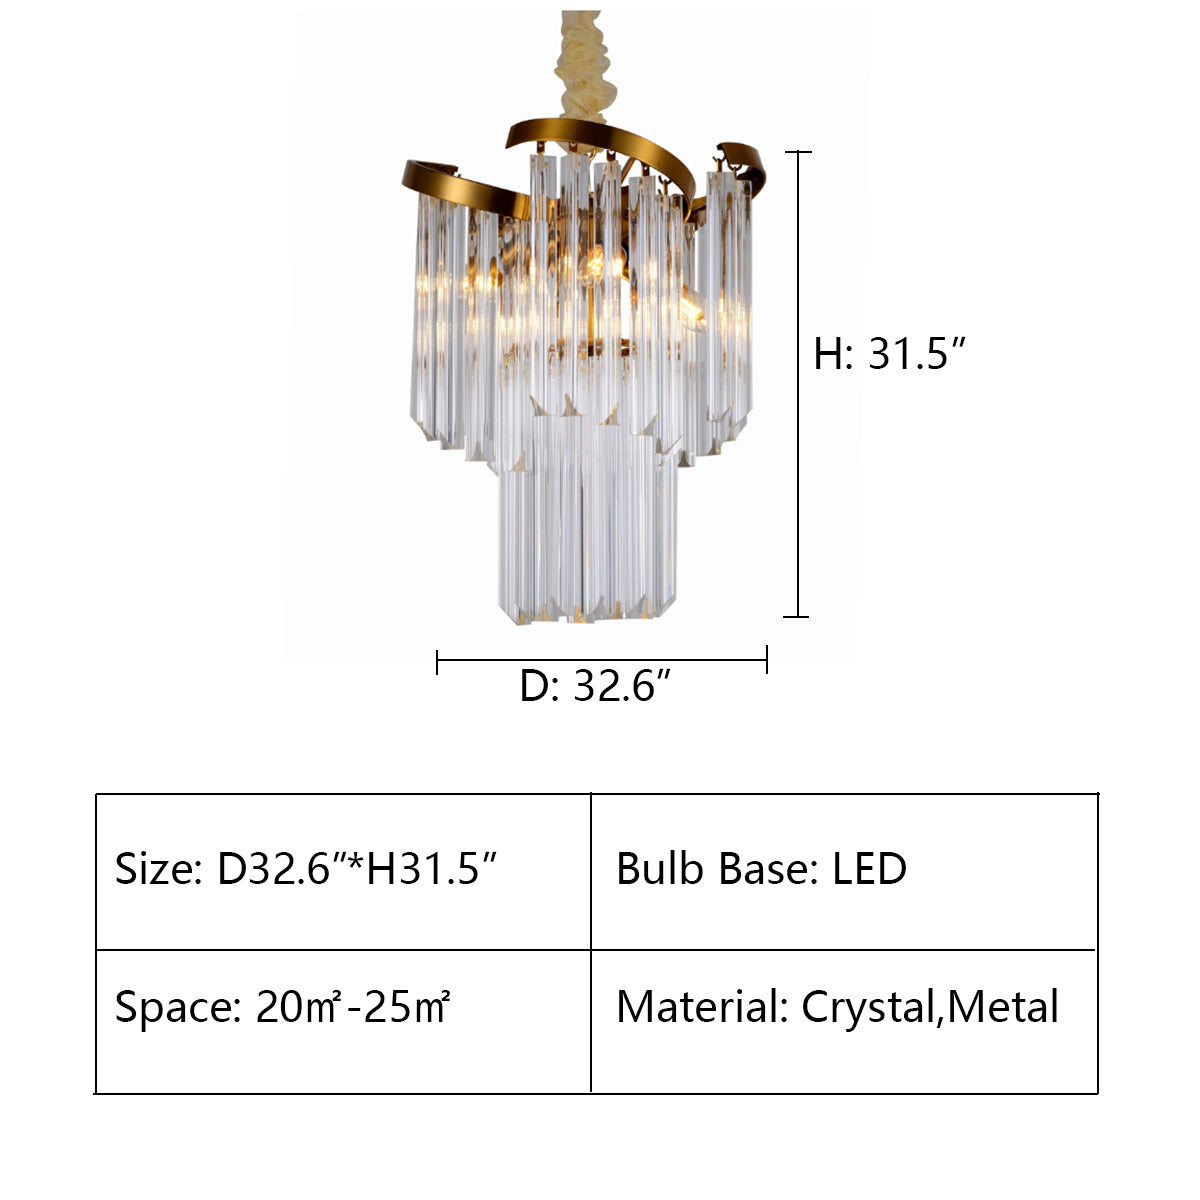 D32.6"*H31.5" TWIN PALMS ROUND CRYSTAL CHANDELIER,chandelier,chandeliers,pendant,ceiling,crystal,spiral,tiers,layers,multi-tier,multi-layer,living room,dining room,bedroom